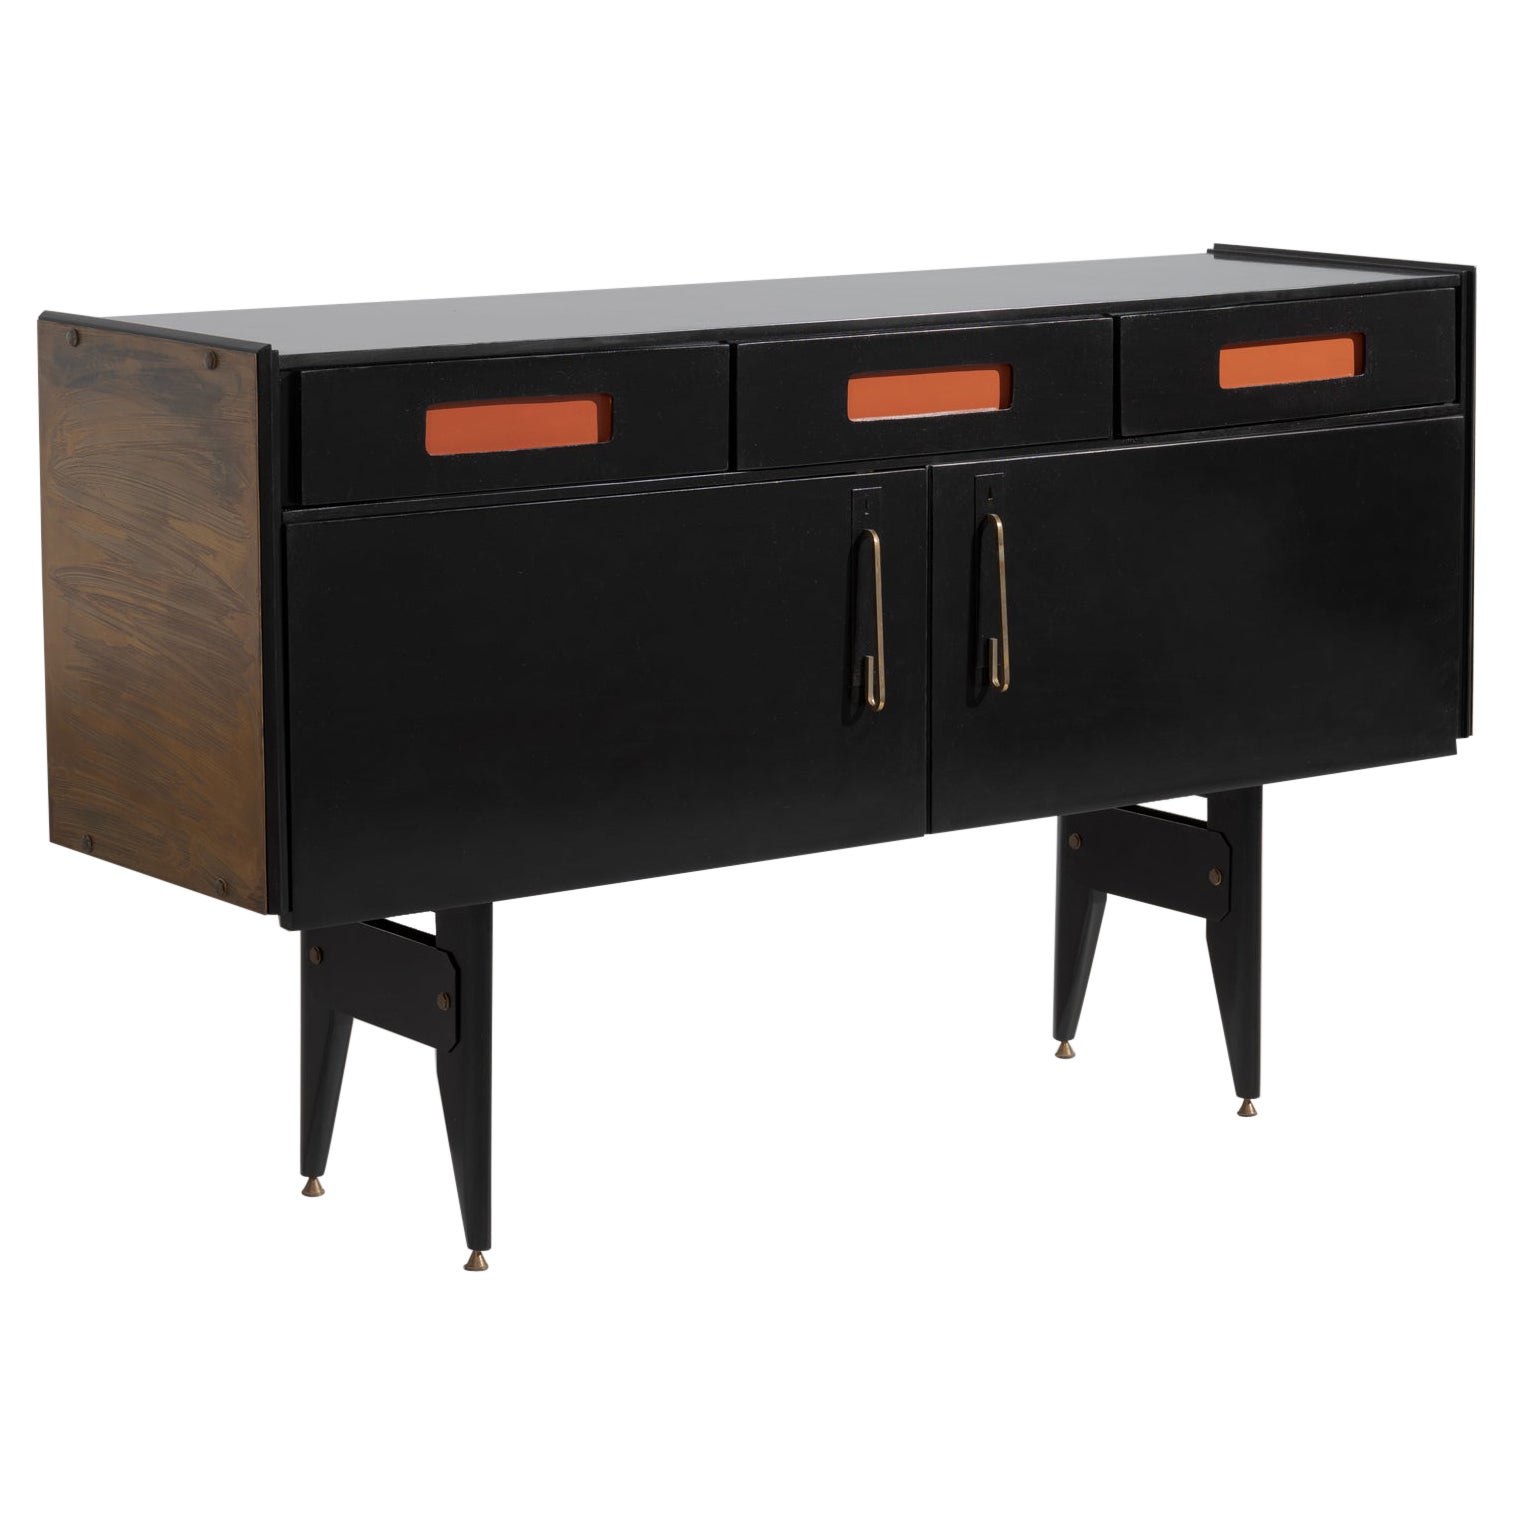 Restyled and Restored Midcentury Sideboard with Modern Italian Design